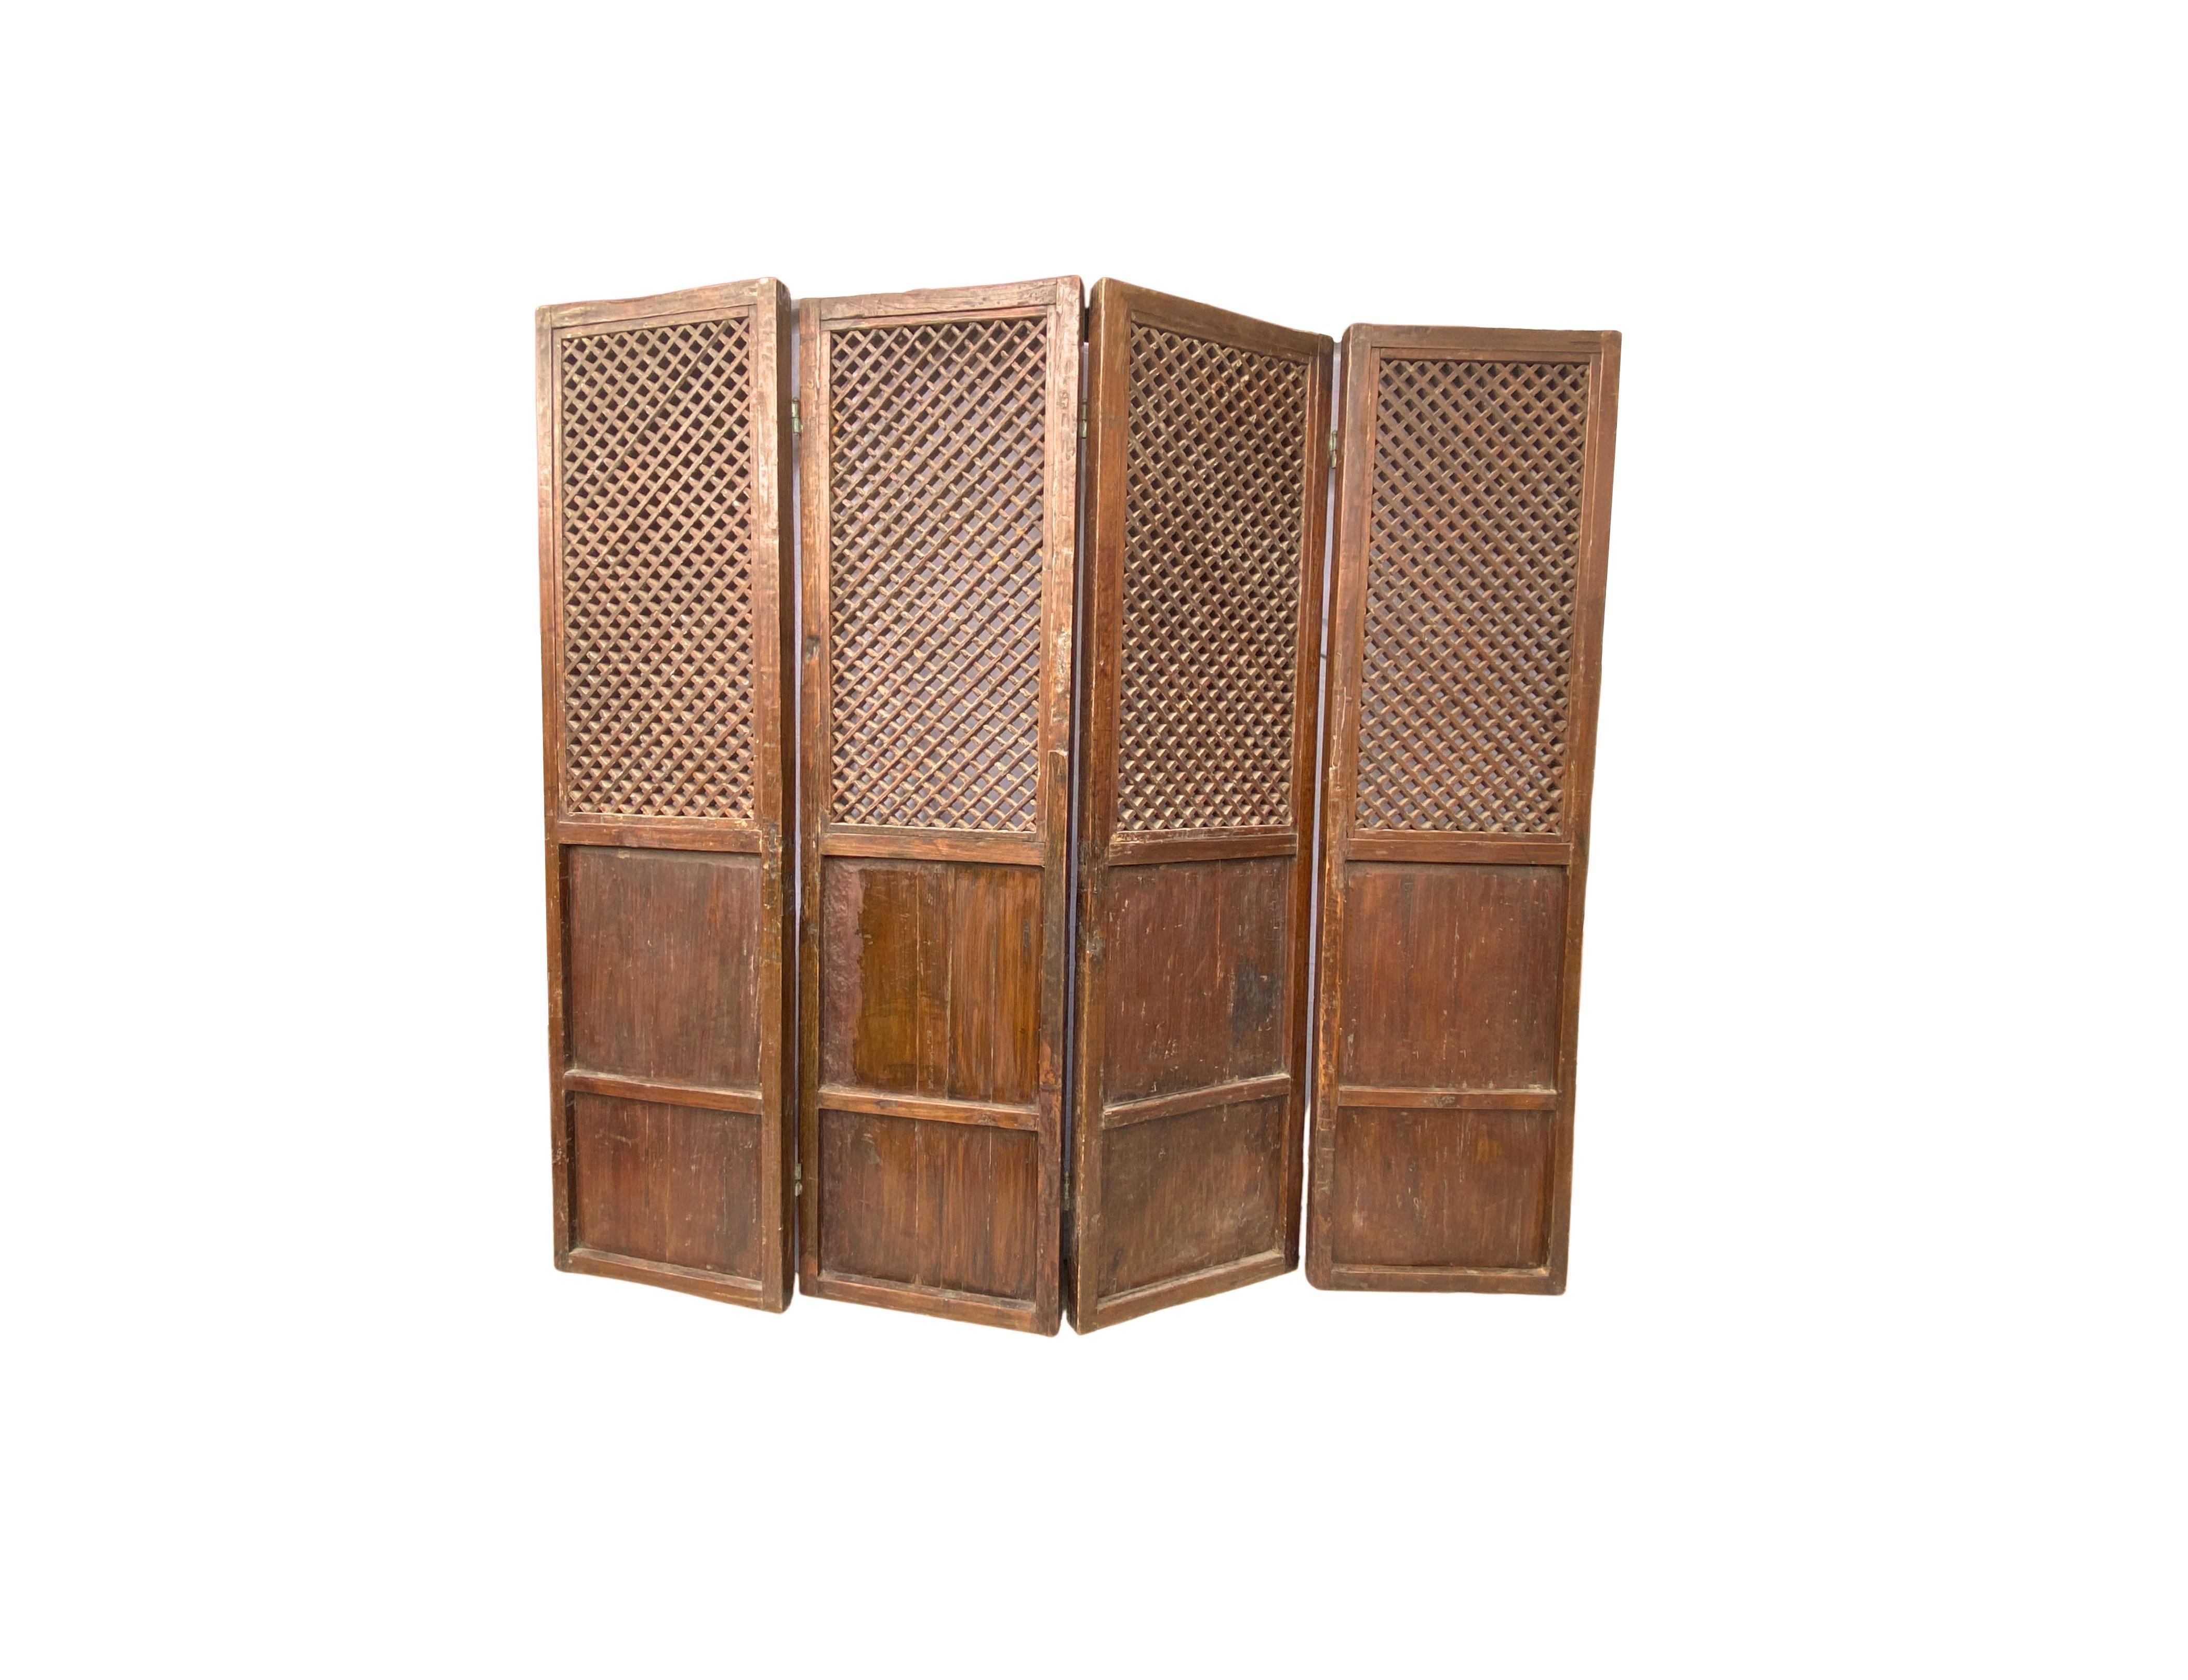 Qing Dynasty Chinese Four Panel Screen c. 1850 For Sale 6